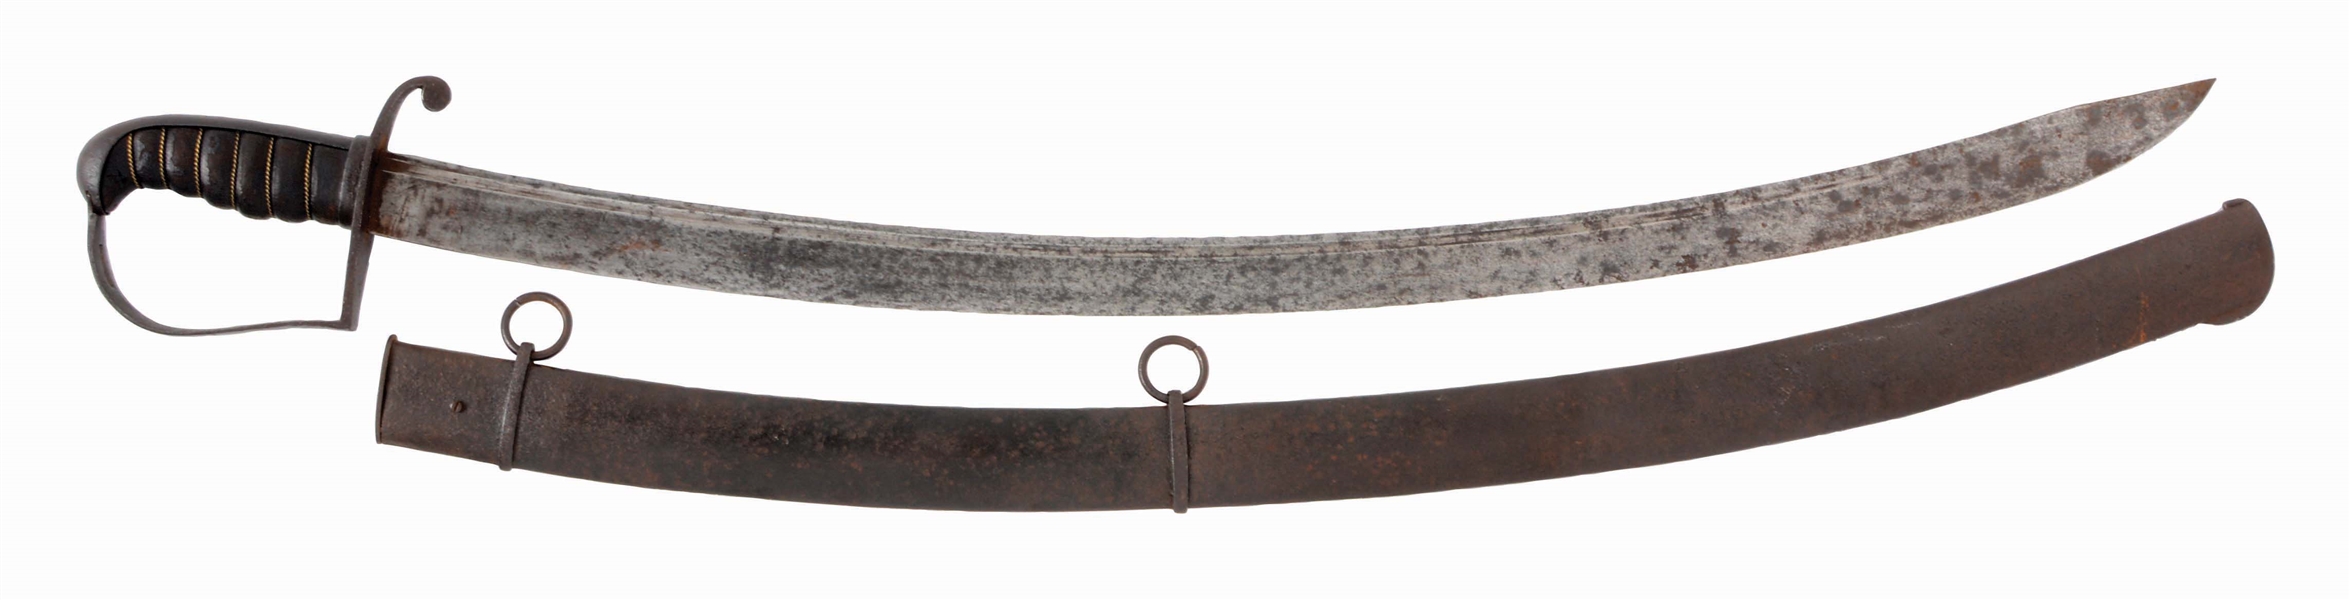 RARE 1813 MARYLAND CONTRACT CAVALRY SABER BY HENRY.